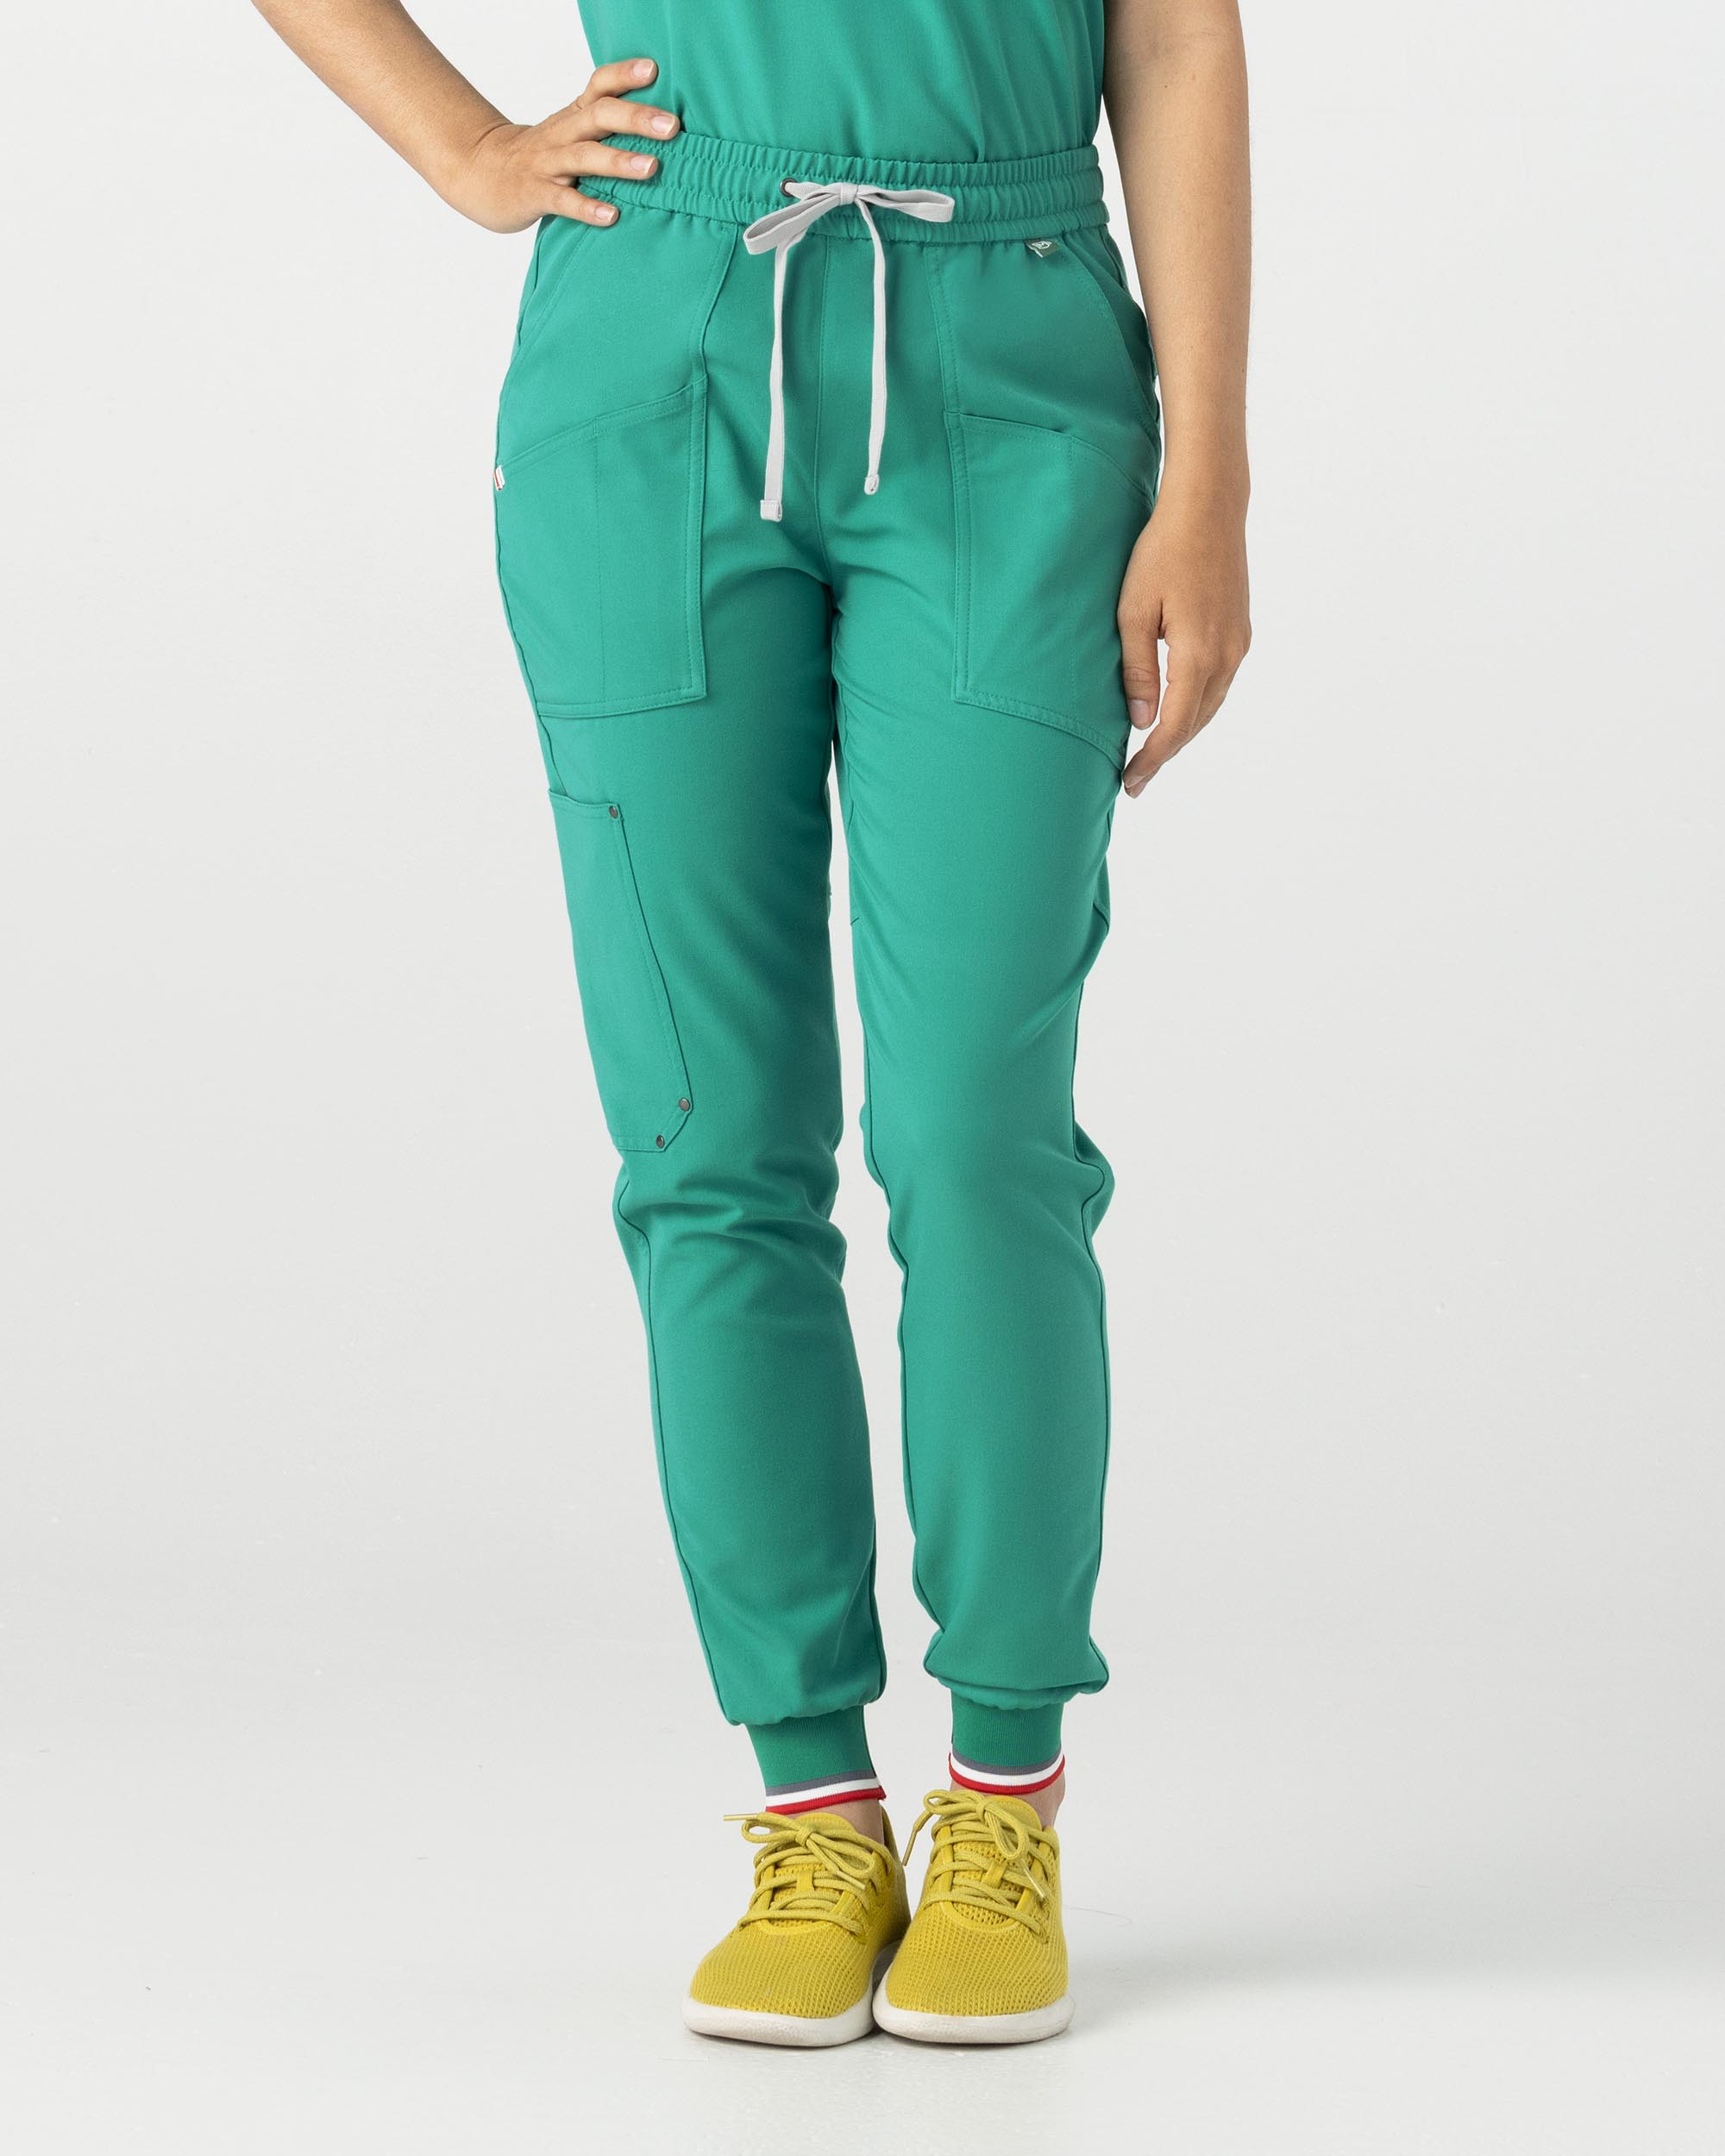 Women's Scrubs  Jogger Pants for Nurses and Medical Professionals – Folds  Wear